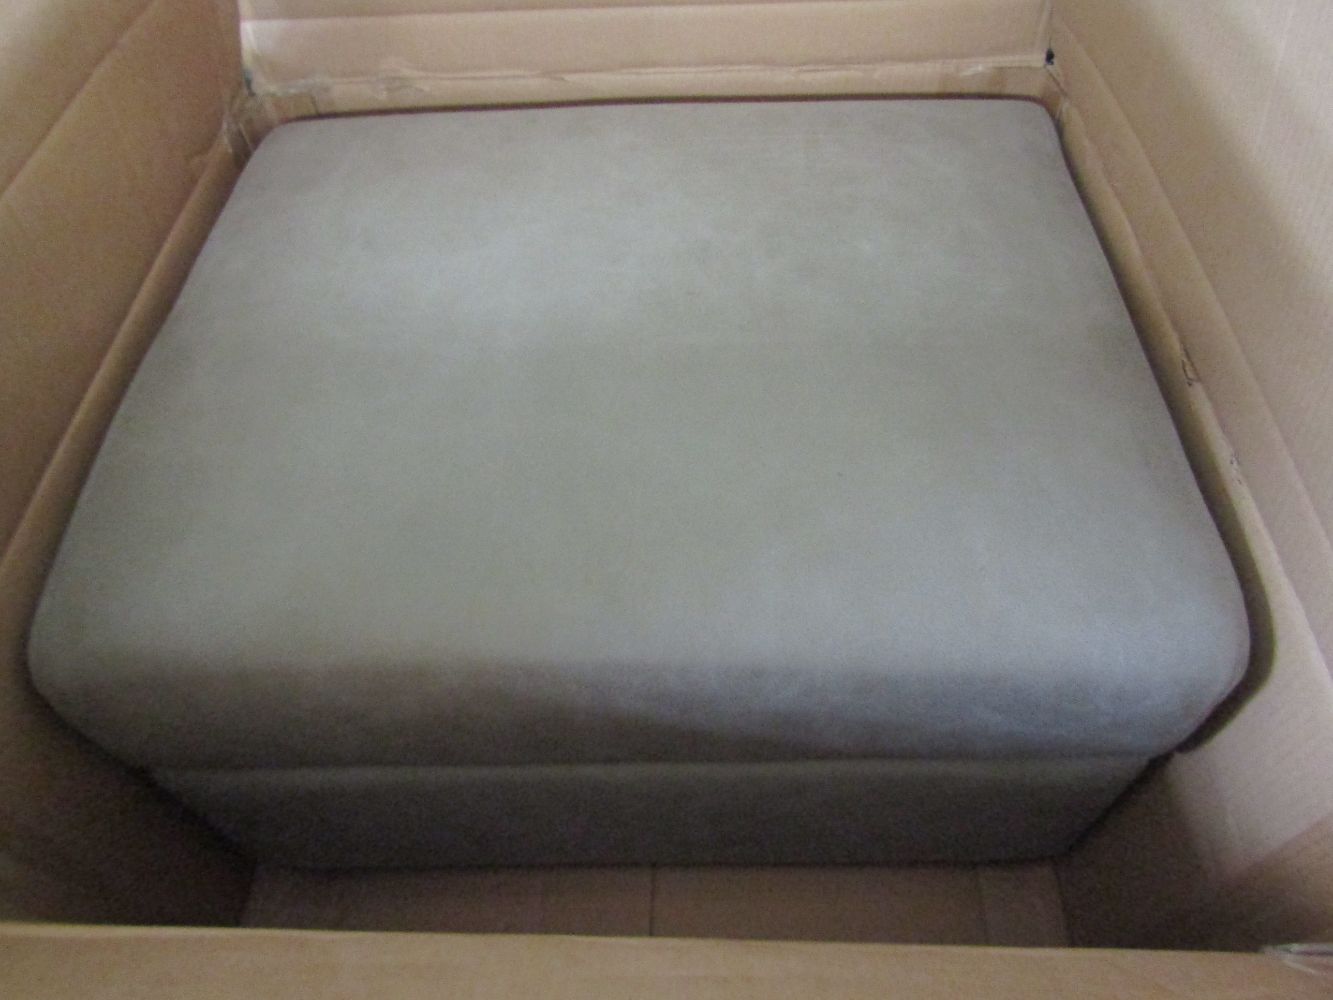 £10 Tuesday Footstool and Dining chair Liquidation special, all lots are either £10 or under